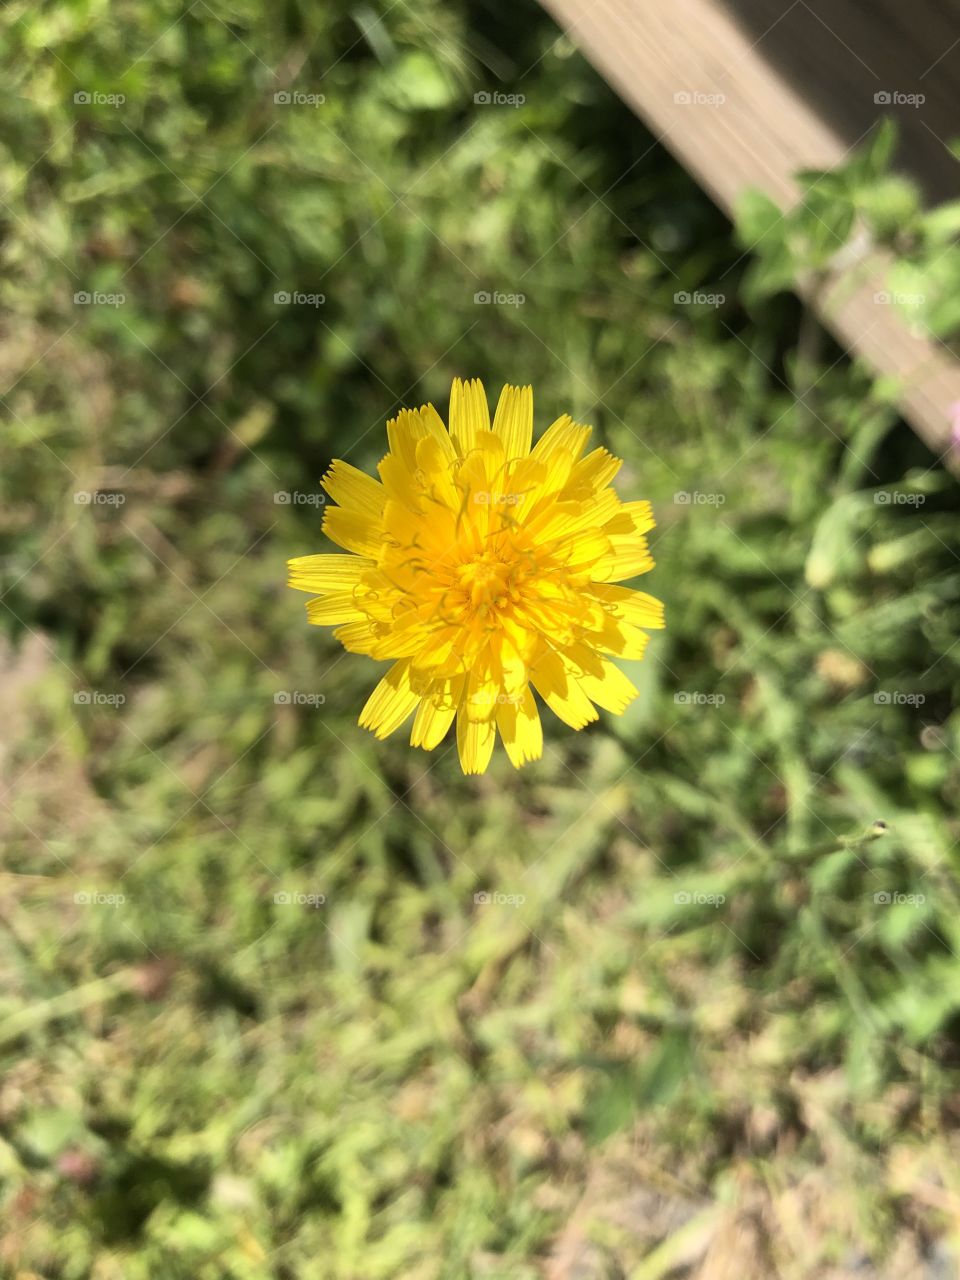 Even weeds can be beautiful 